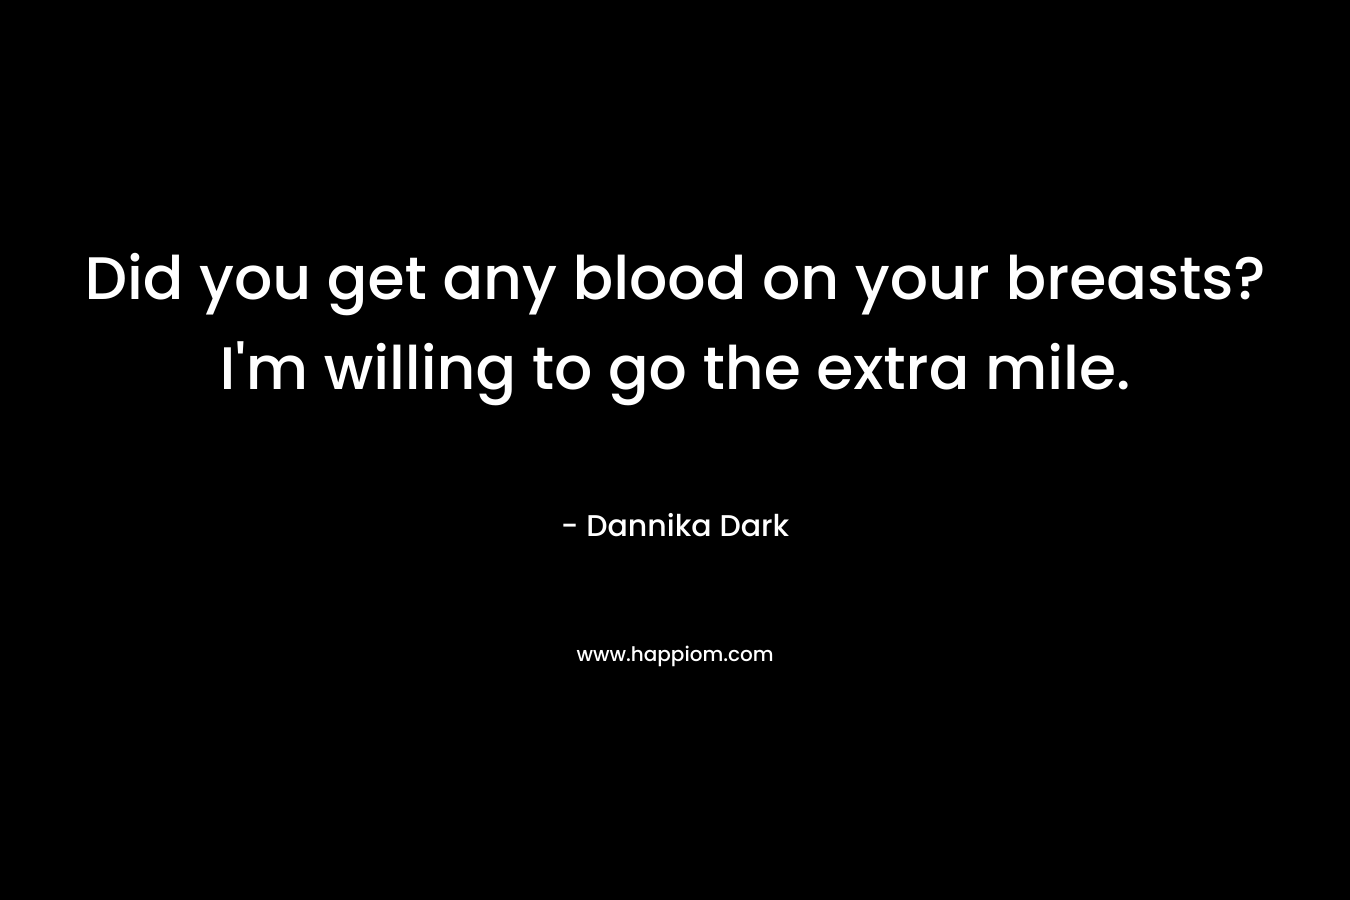 Did you get any blood on your breasts? I'm willing to go the extra mile.